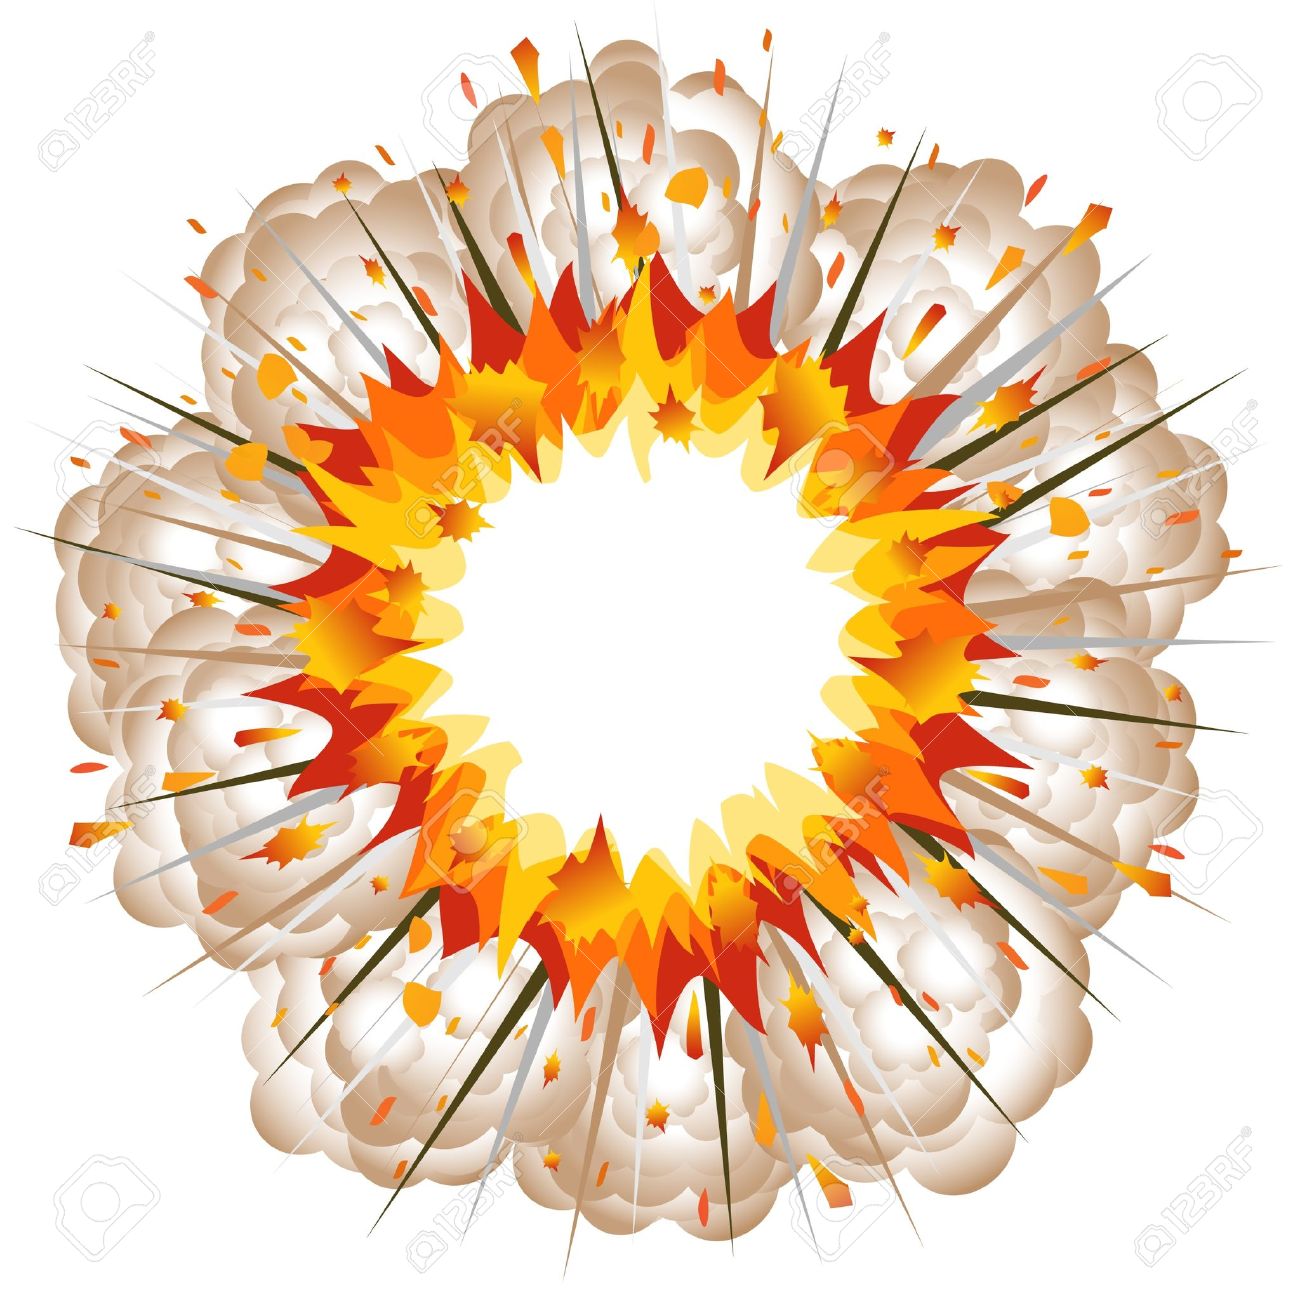 fire clipart fire explosion